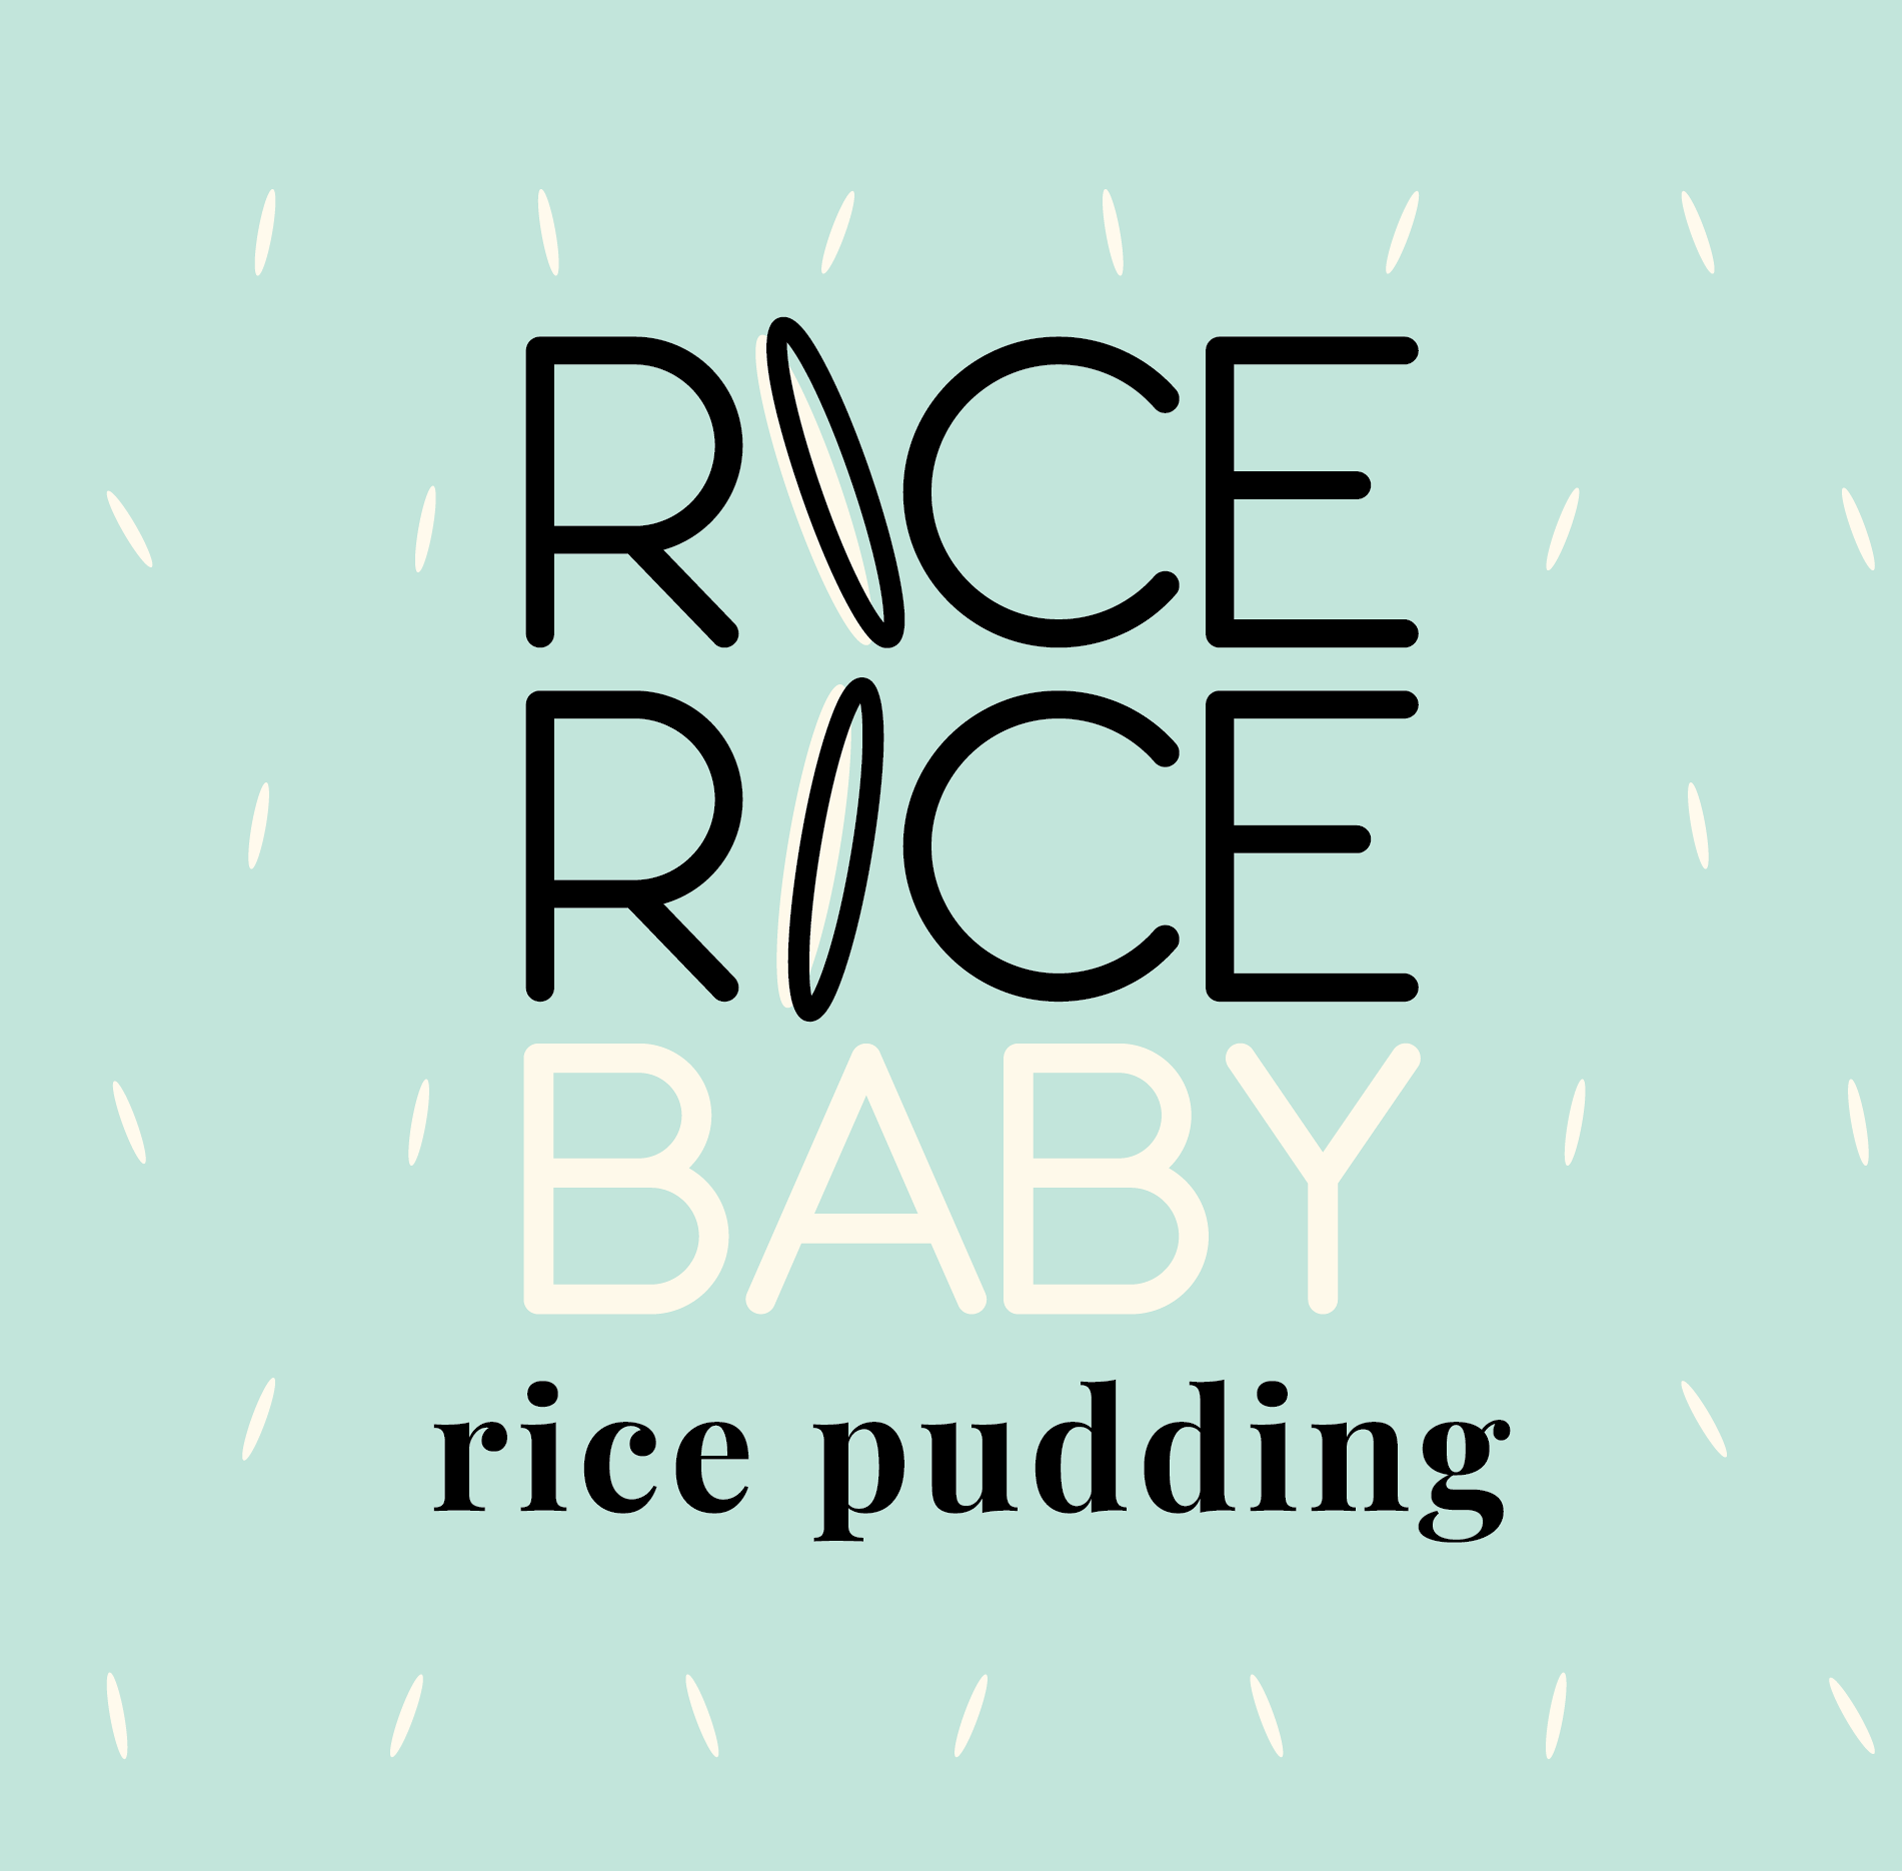 Fun, exciting, and playful - Rice Rice Baby